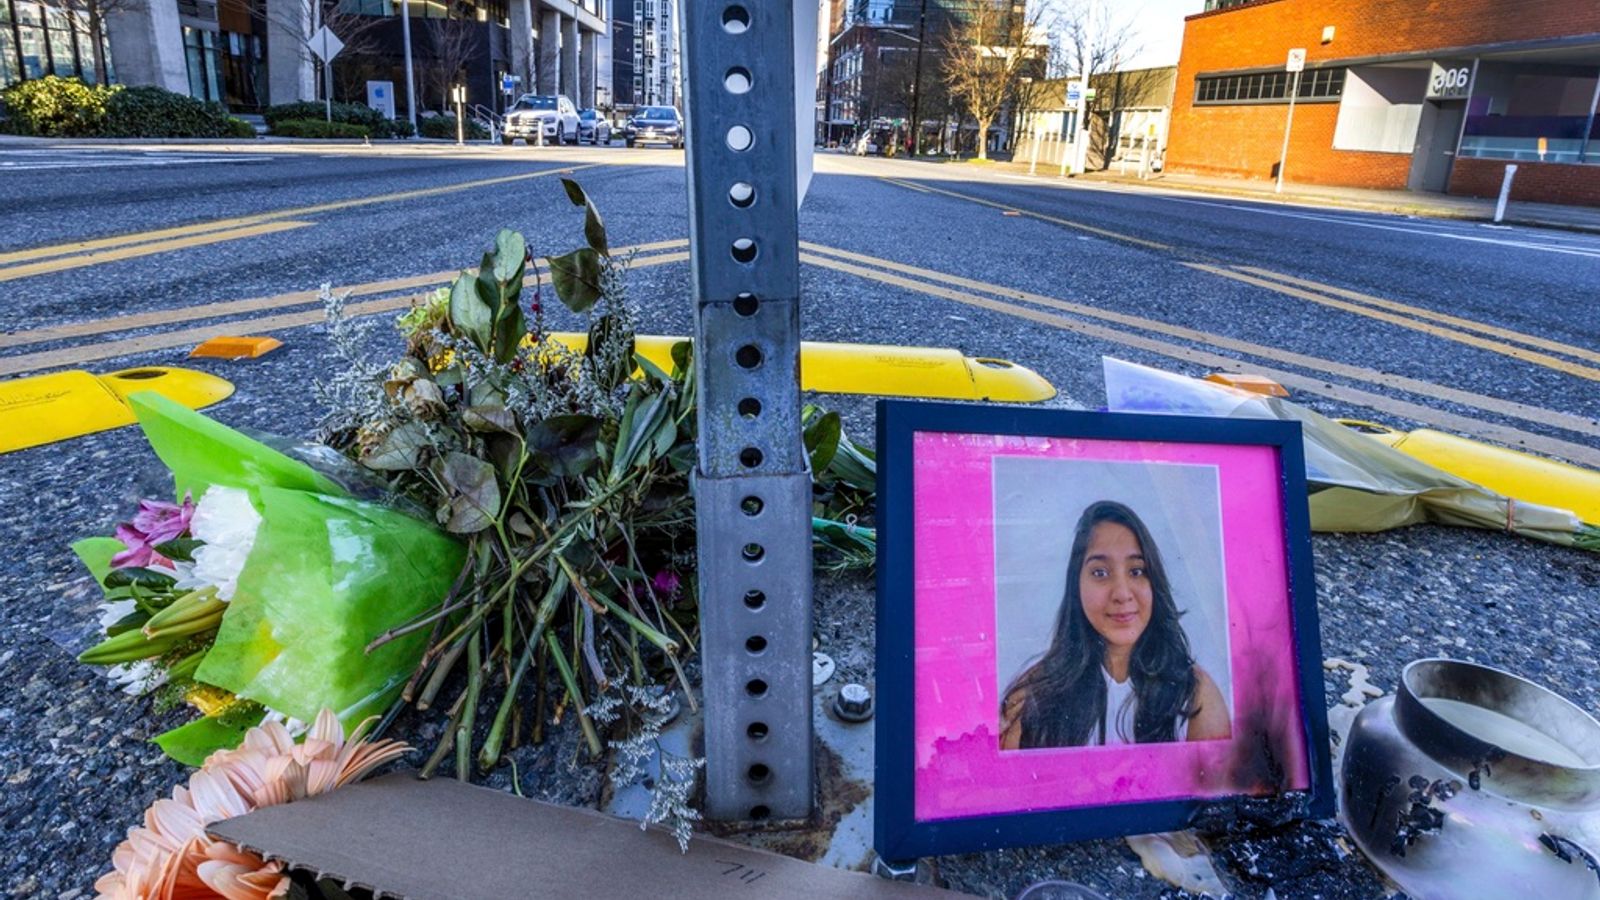 Seattle police officer recorded joking after woman killed in fatal crash